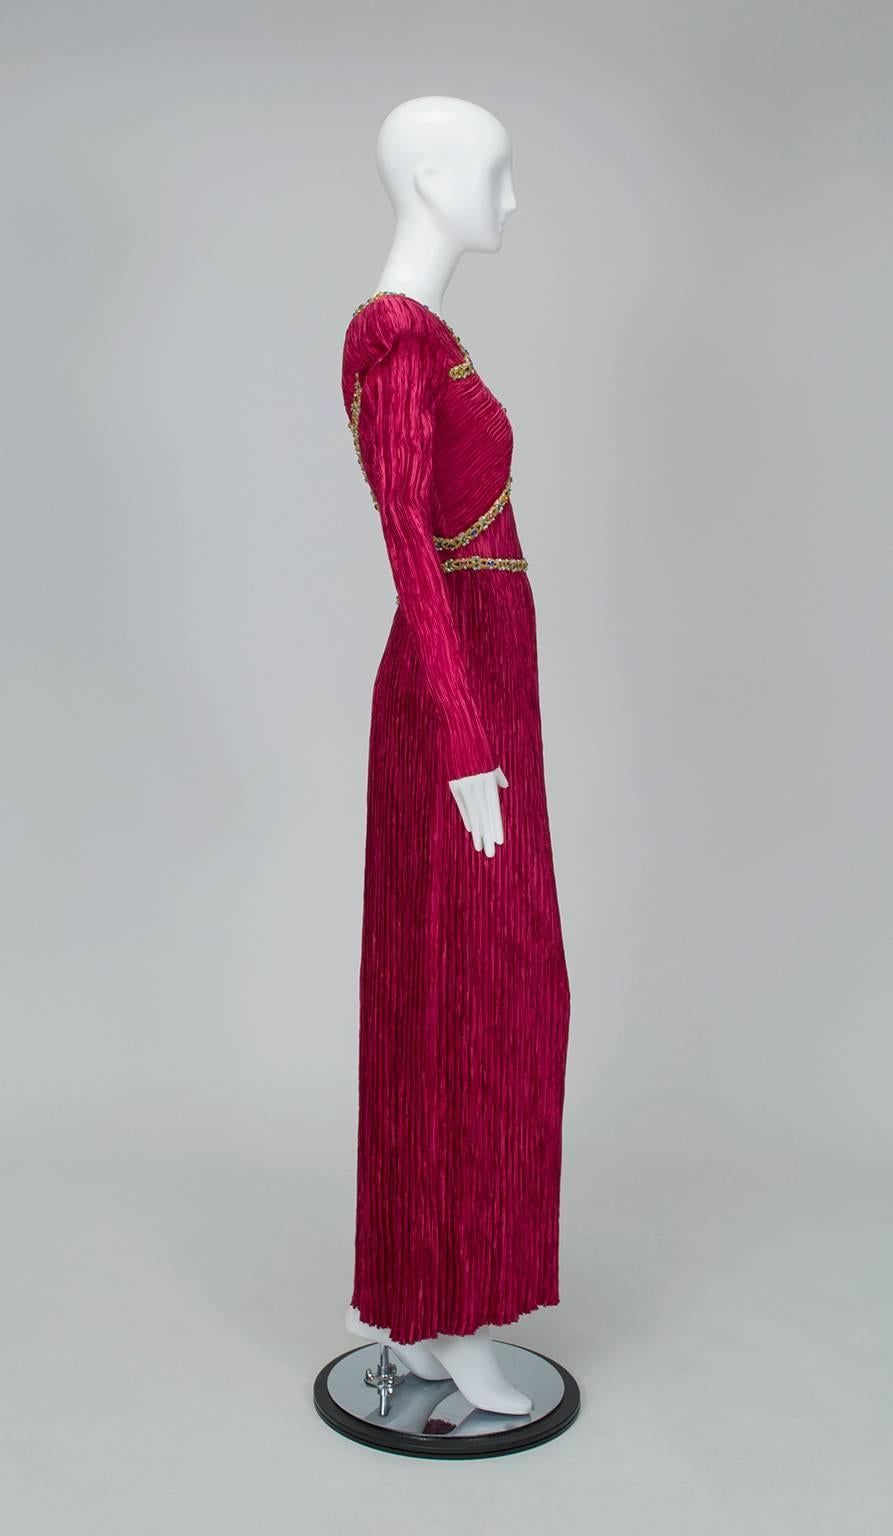 “Modesty, what elegance!” said Coco Chanel. McFadden reiterates with a statuesque gown that evokes Greek goddess-like femininity but reveals nothing except a keyhole in the center back. And the color? Like ripe red raspberries: delicious!

Long